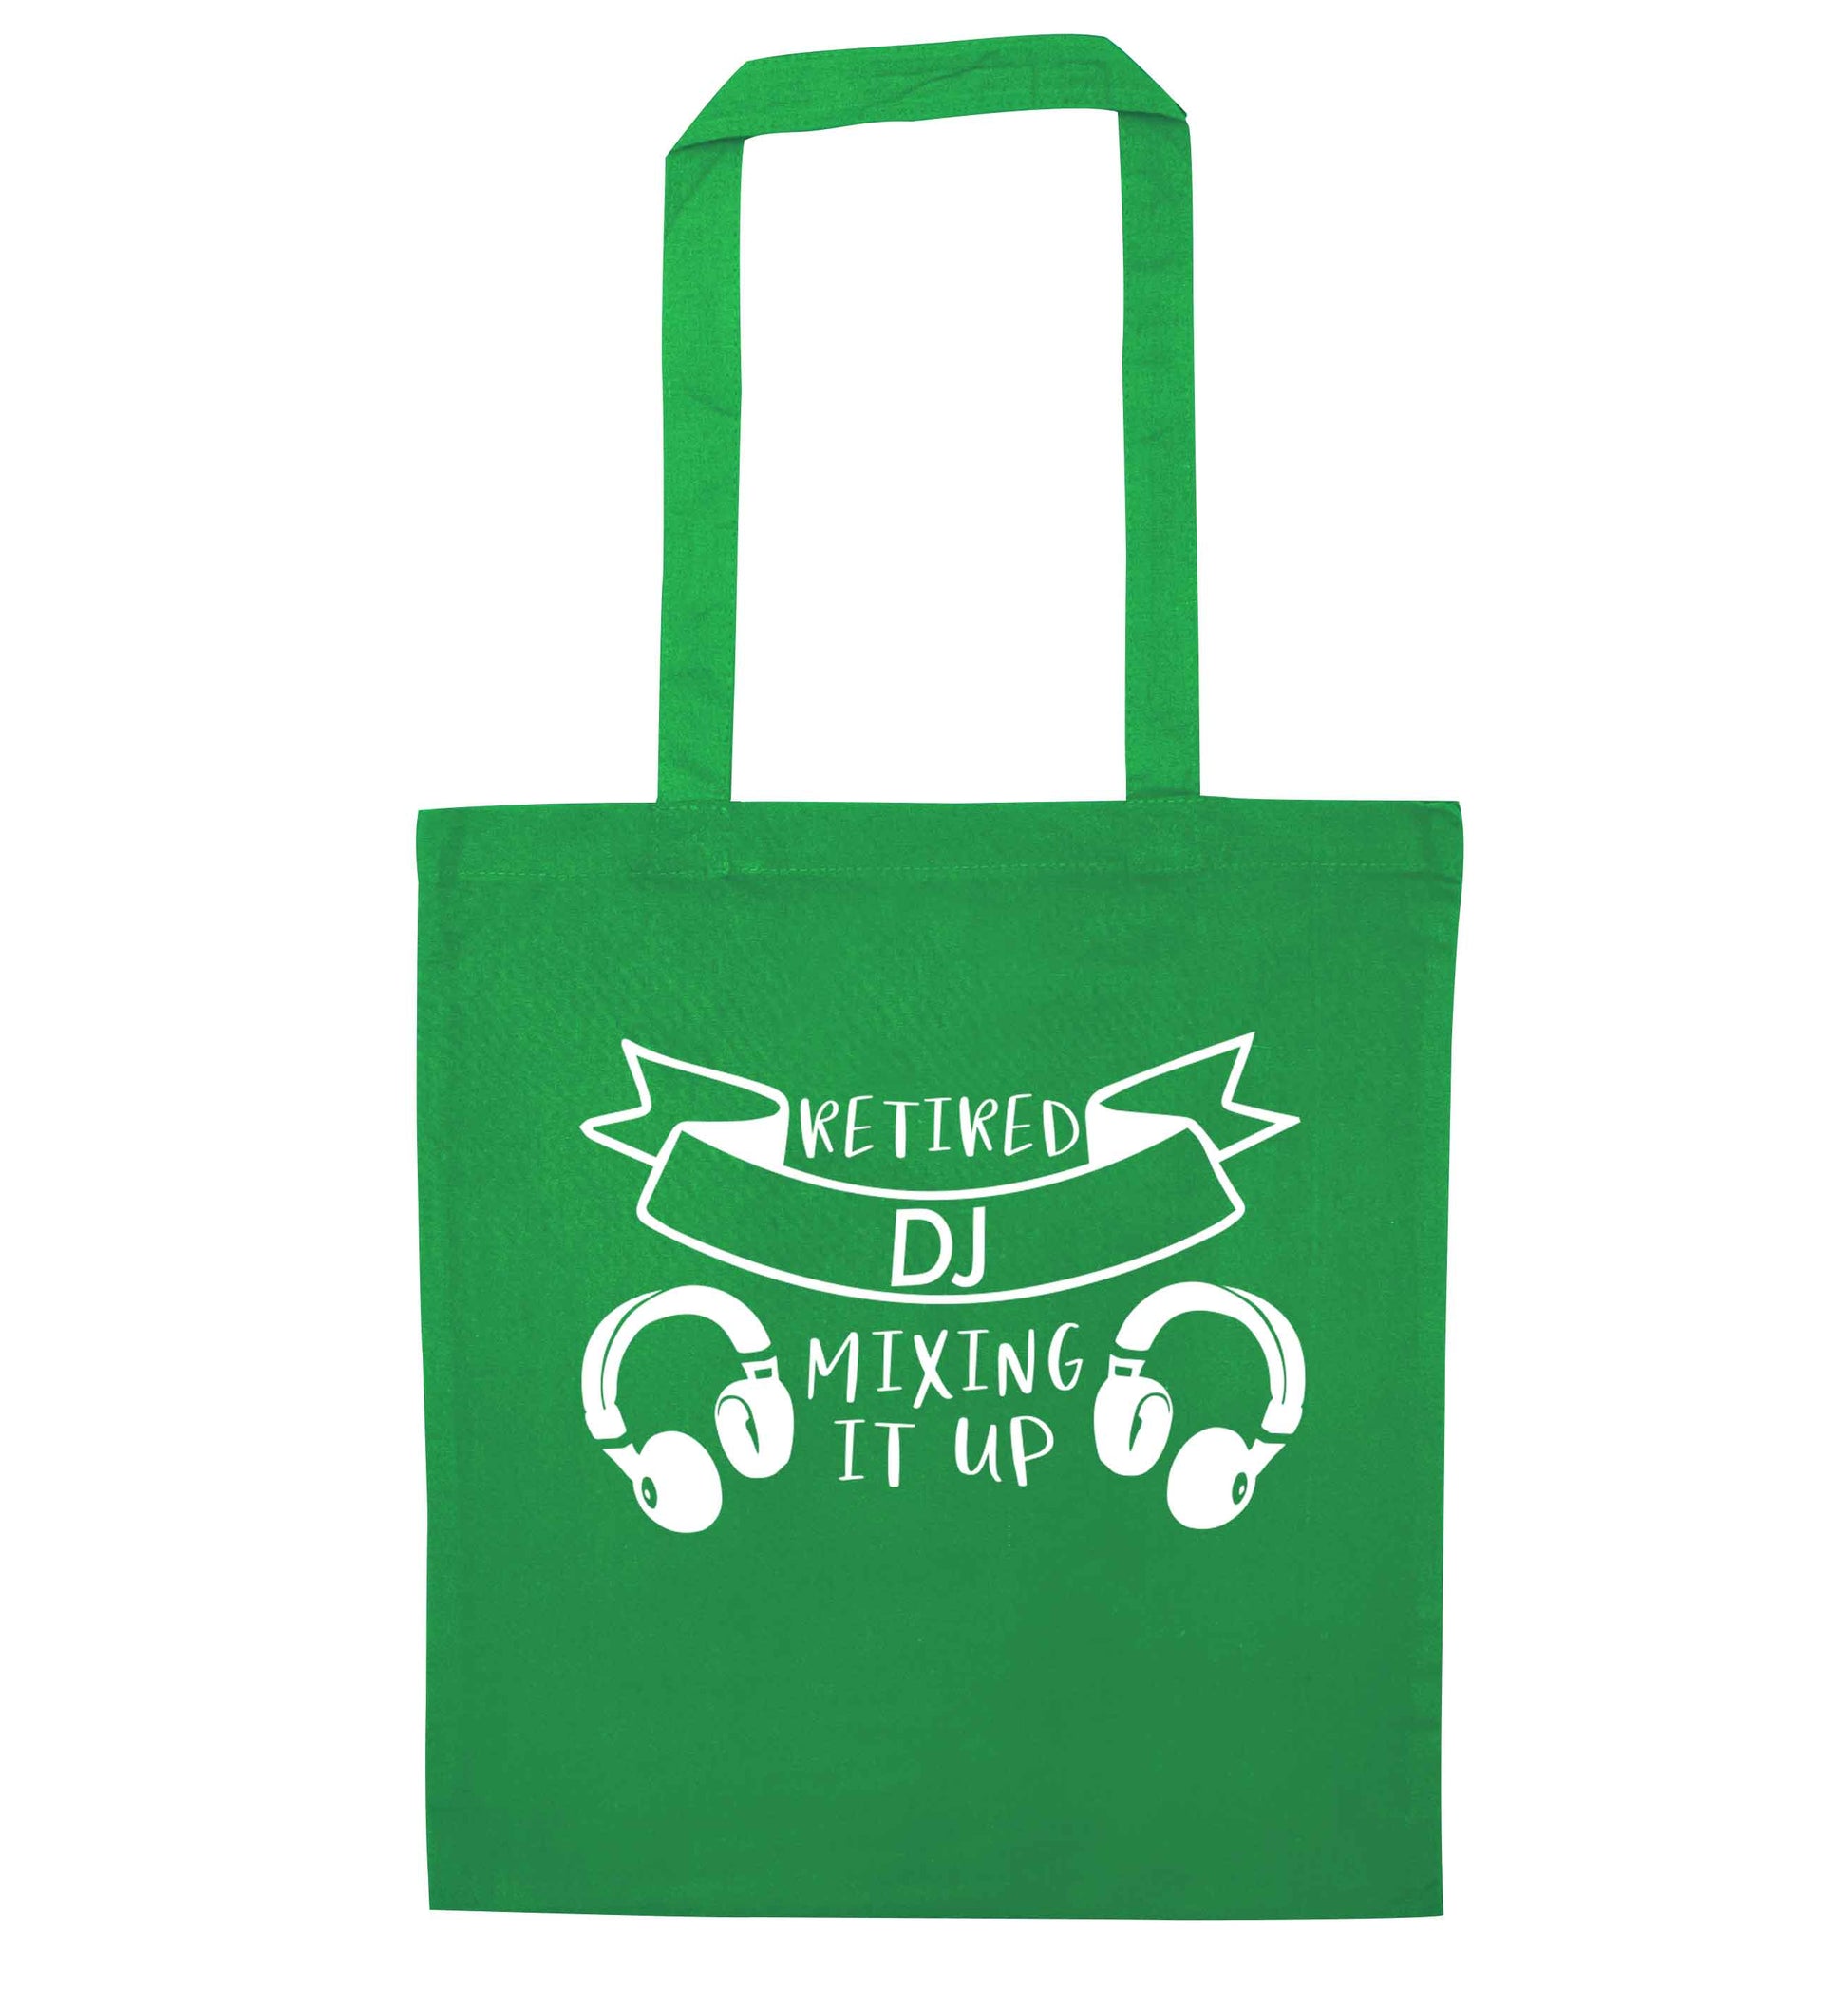 Retired DJ mixing it up green tote bag